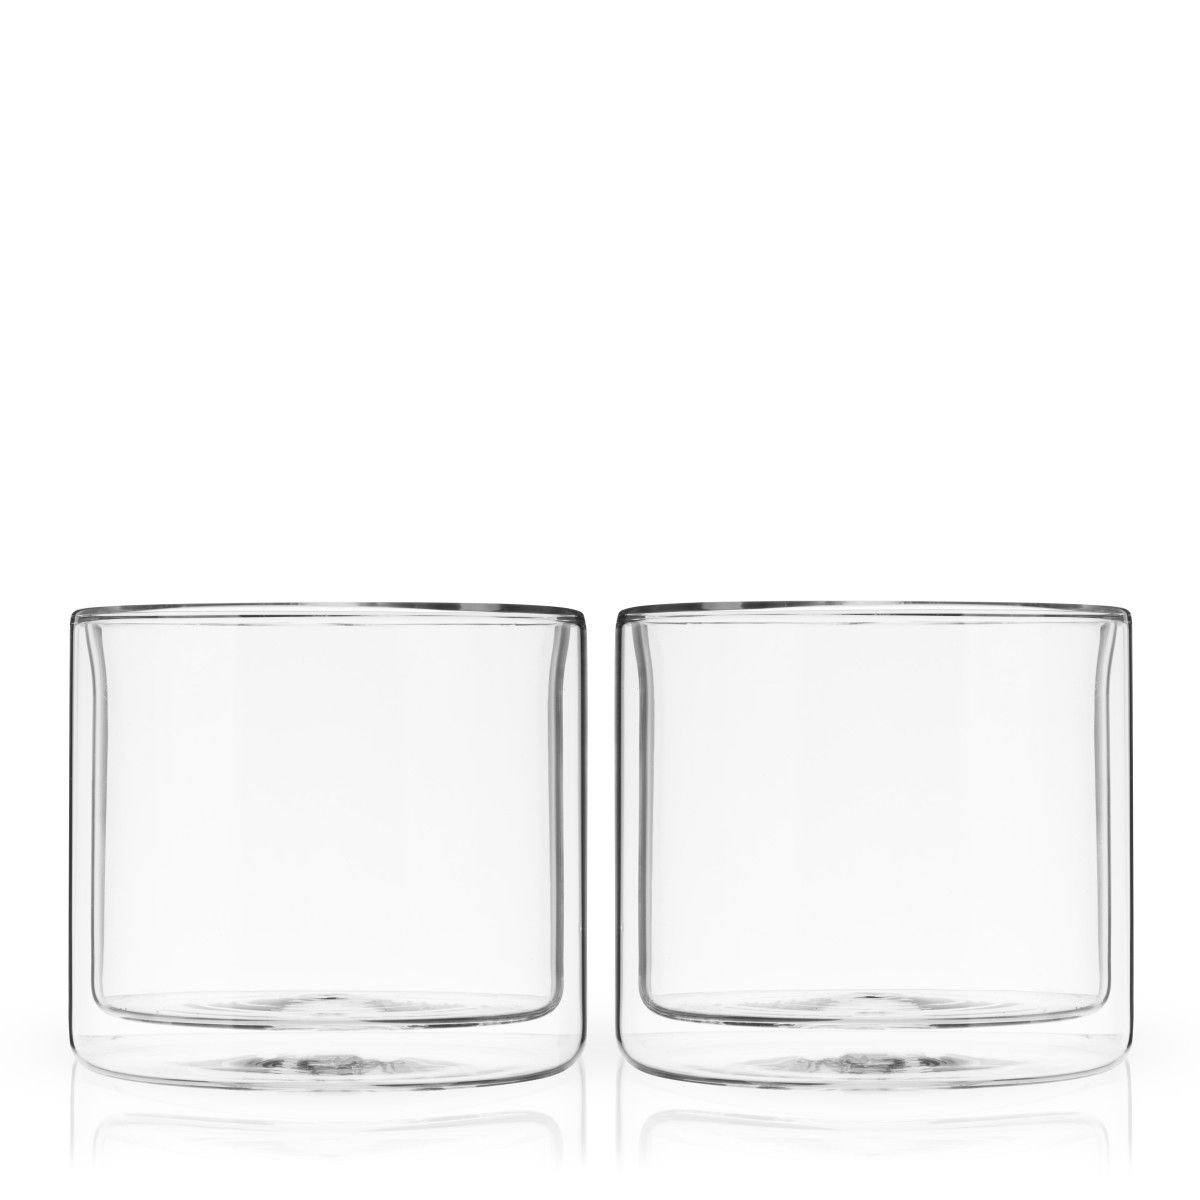 TRUE Double Walled Old Fashioned Glasses, Set of 2 - lily & onyx